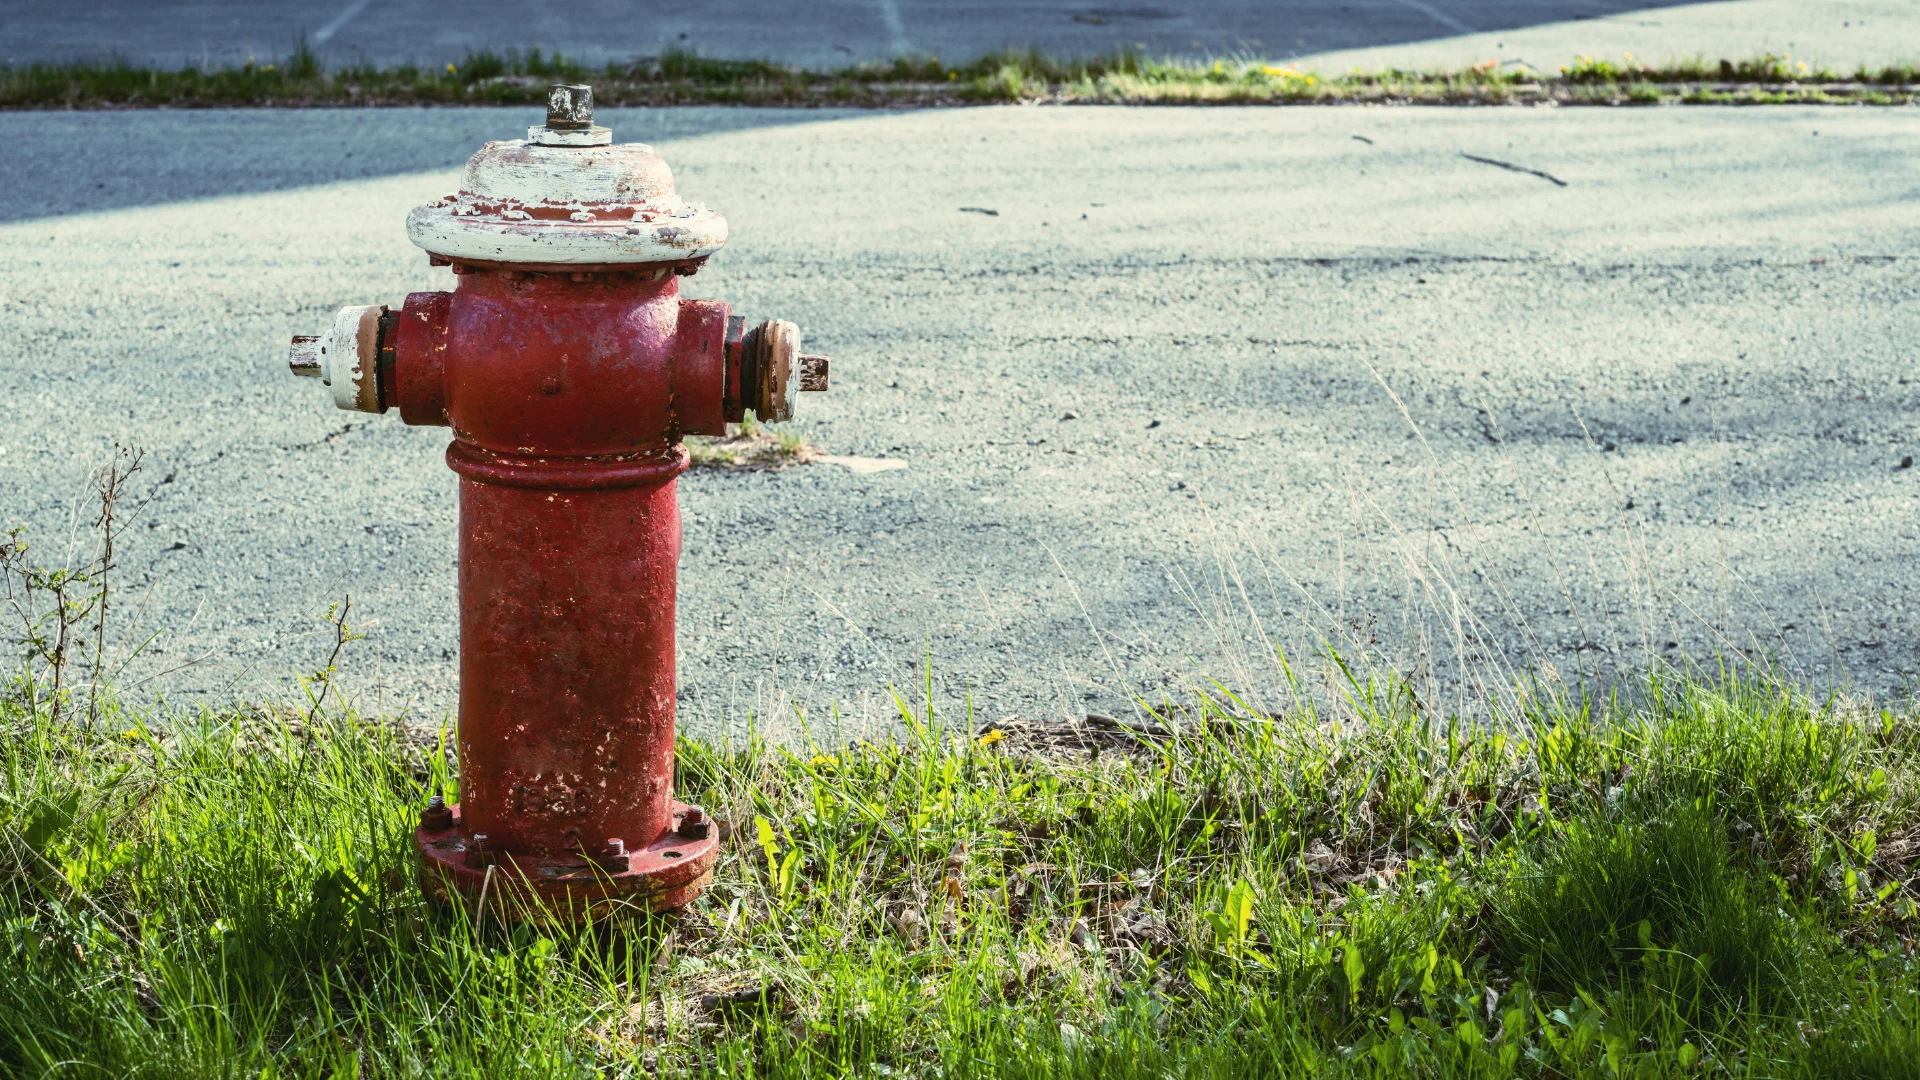 Authorities investigating spike in fire hydrant thefts ahead of wildfire season